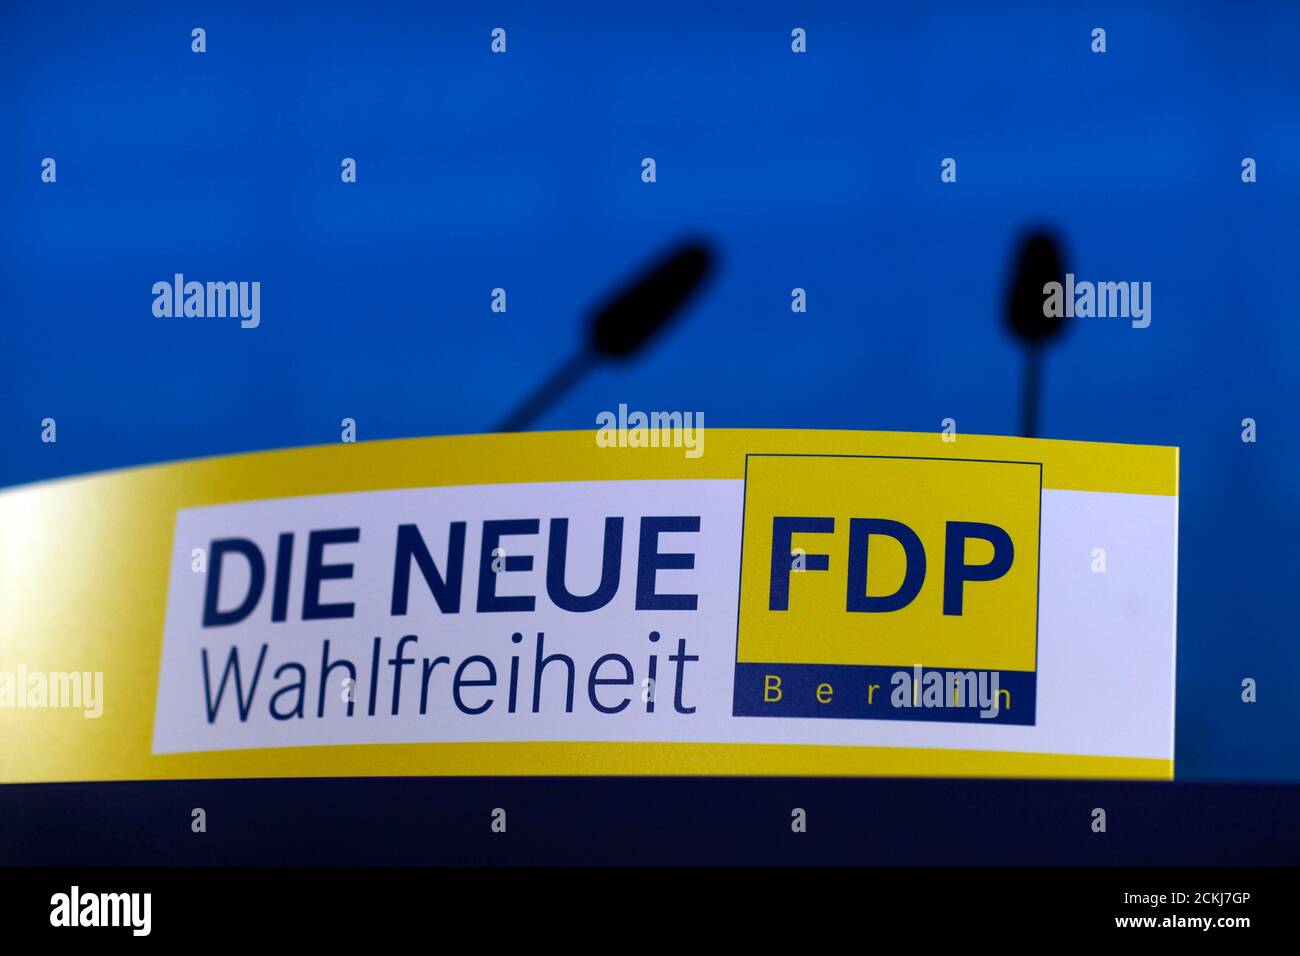 A view shows the speaker's rostrum at a Berlin city election campaign event of the liberal Free Democratic Party (FDP) at the FDP party headquarters in Berlin, September 15, 2011. Berliners go to the polls to elect a new mayor and city parliament on September 18. The words read, 'The New Freedom of Choice. FDP Berlin.'   REUTERS/Thomas Peter  (GERMANY - Tags: POLITICS ELECTIONS) Stock Photo